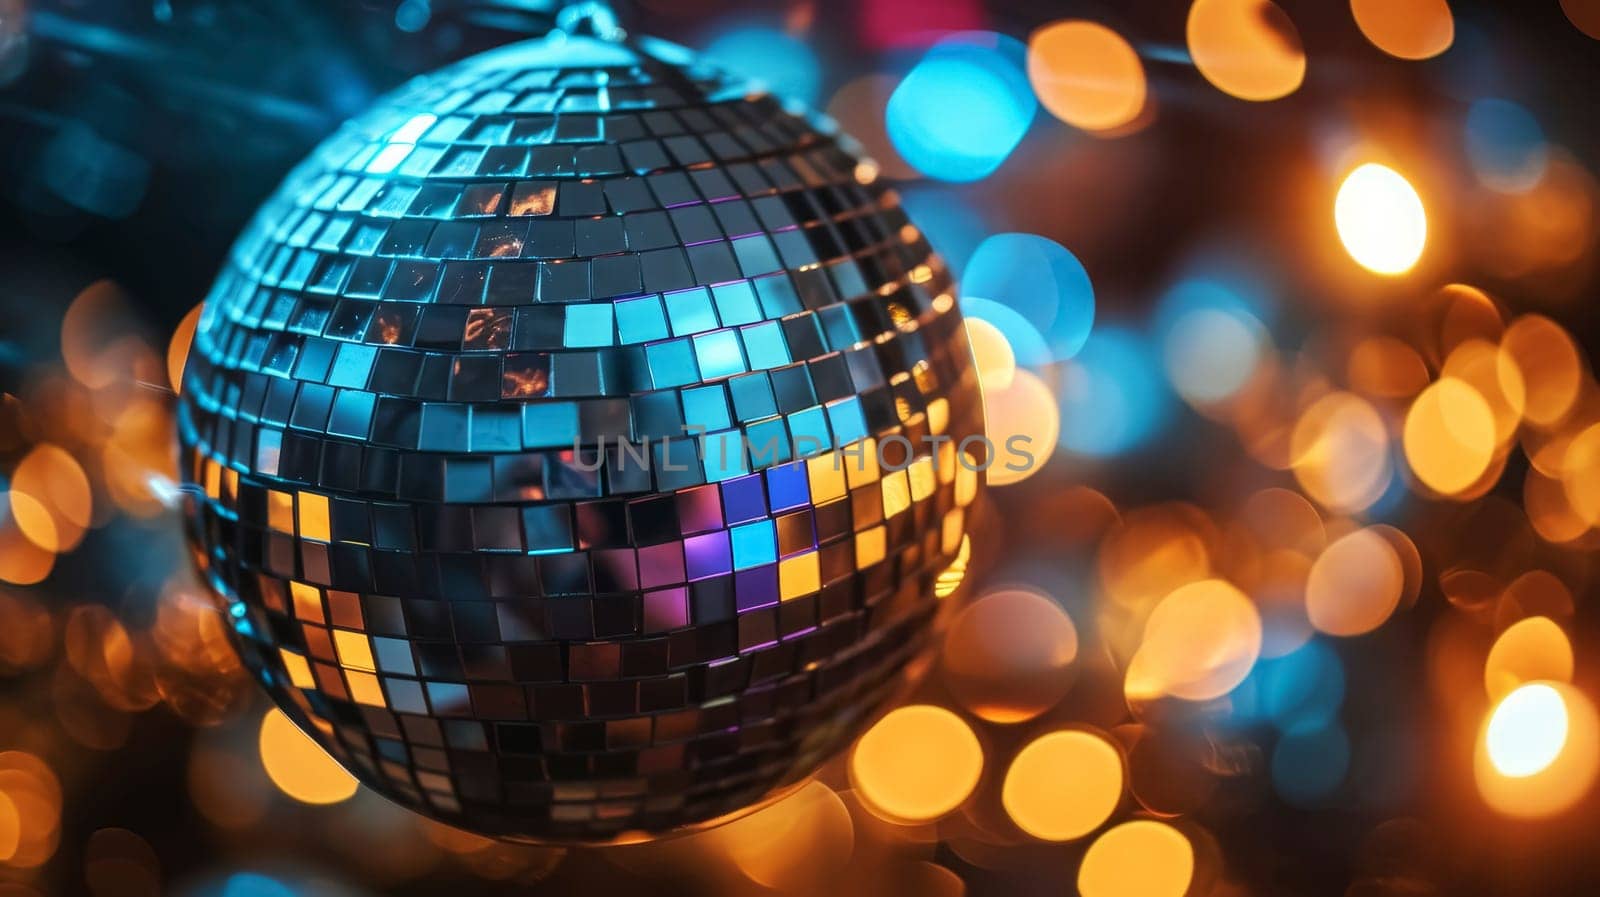 Disco ball with sparkling reflections. Close-up shot with colorful bokeh background. by andreyz